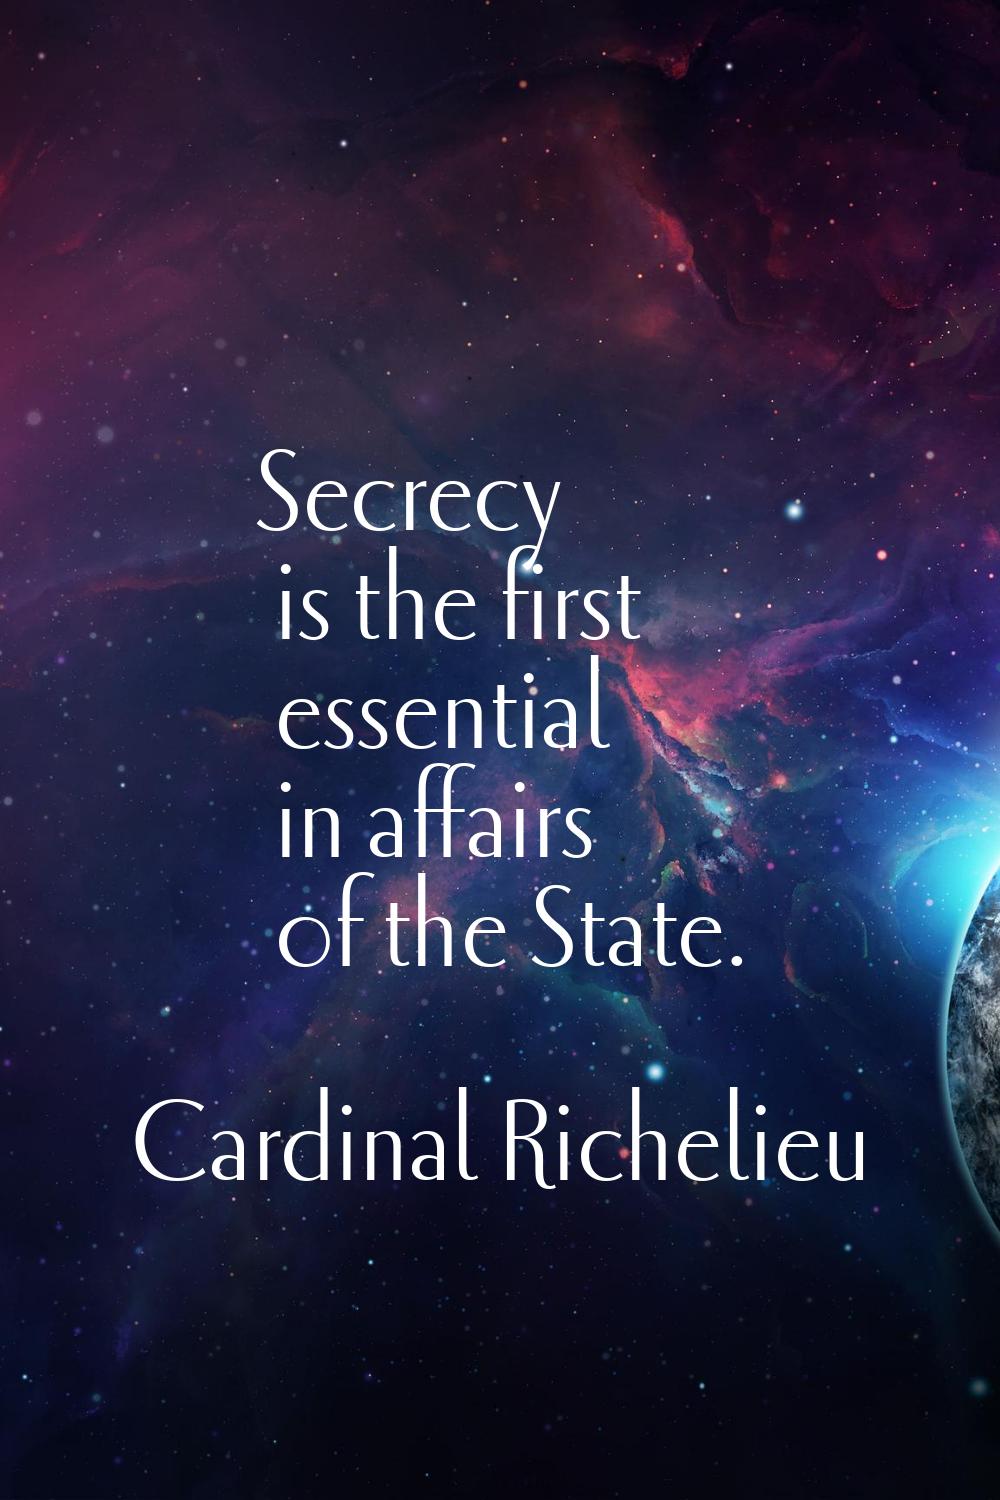 Secrecy is the first essential in affairs of the State.